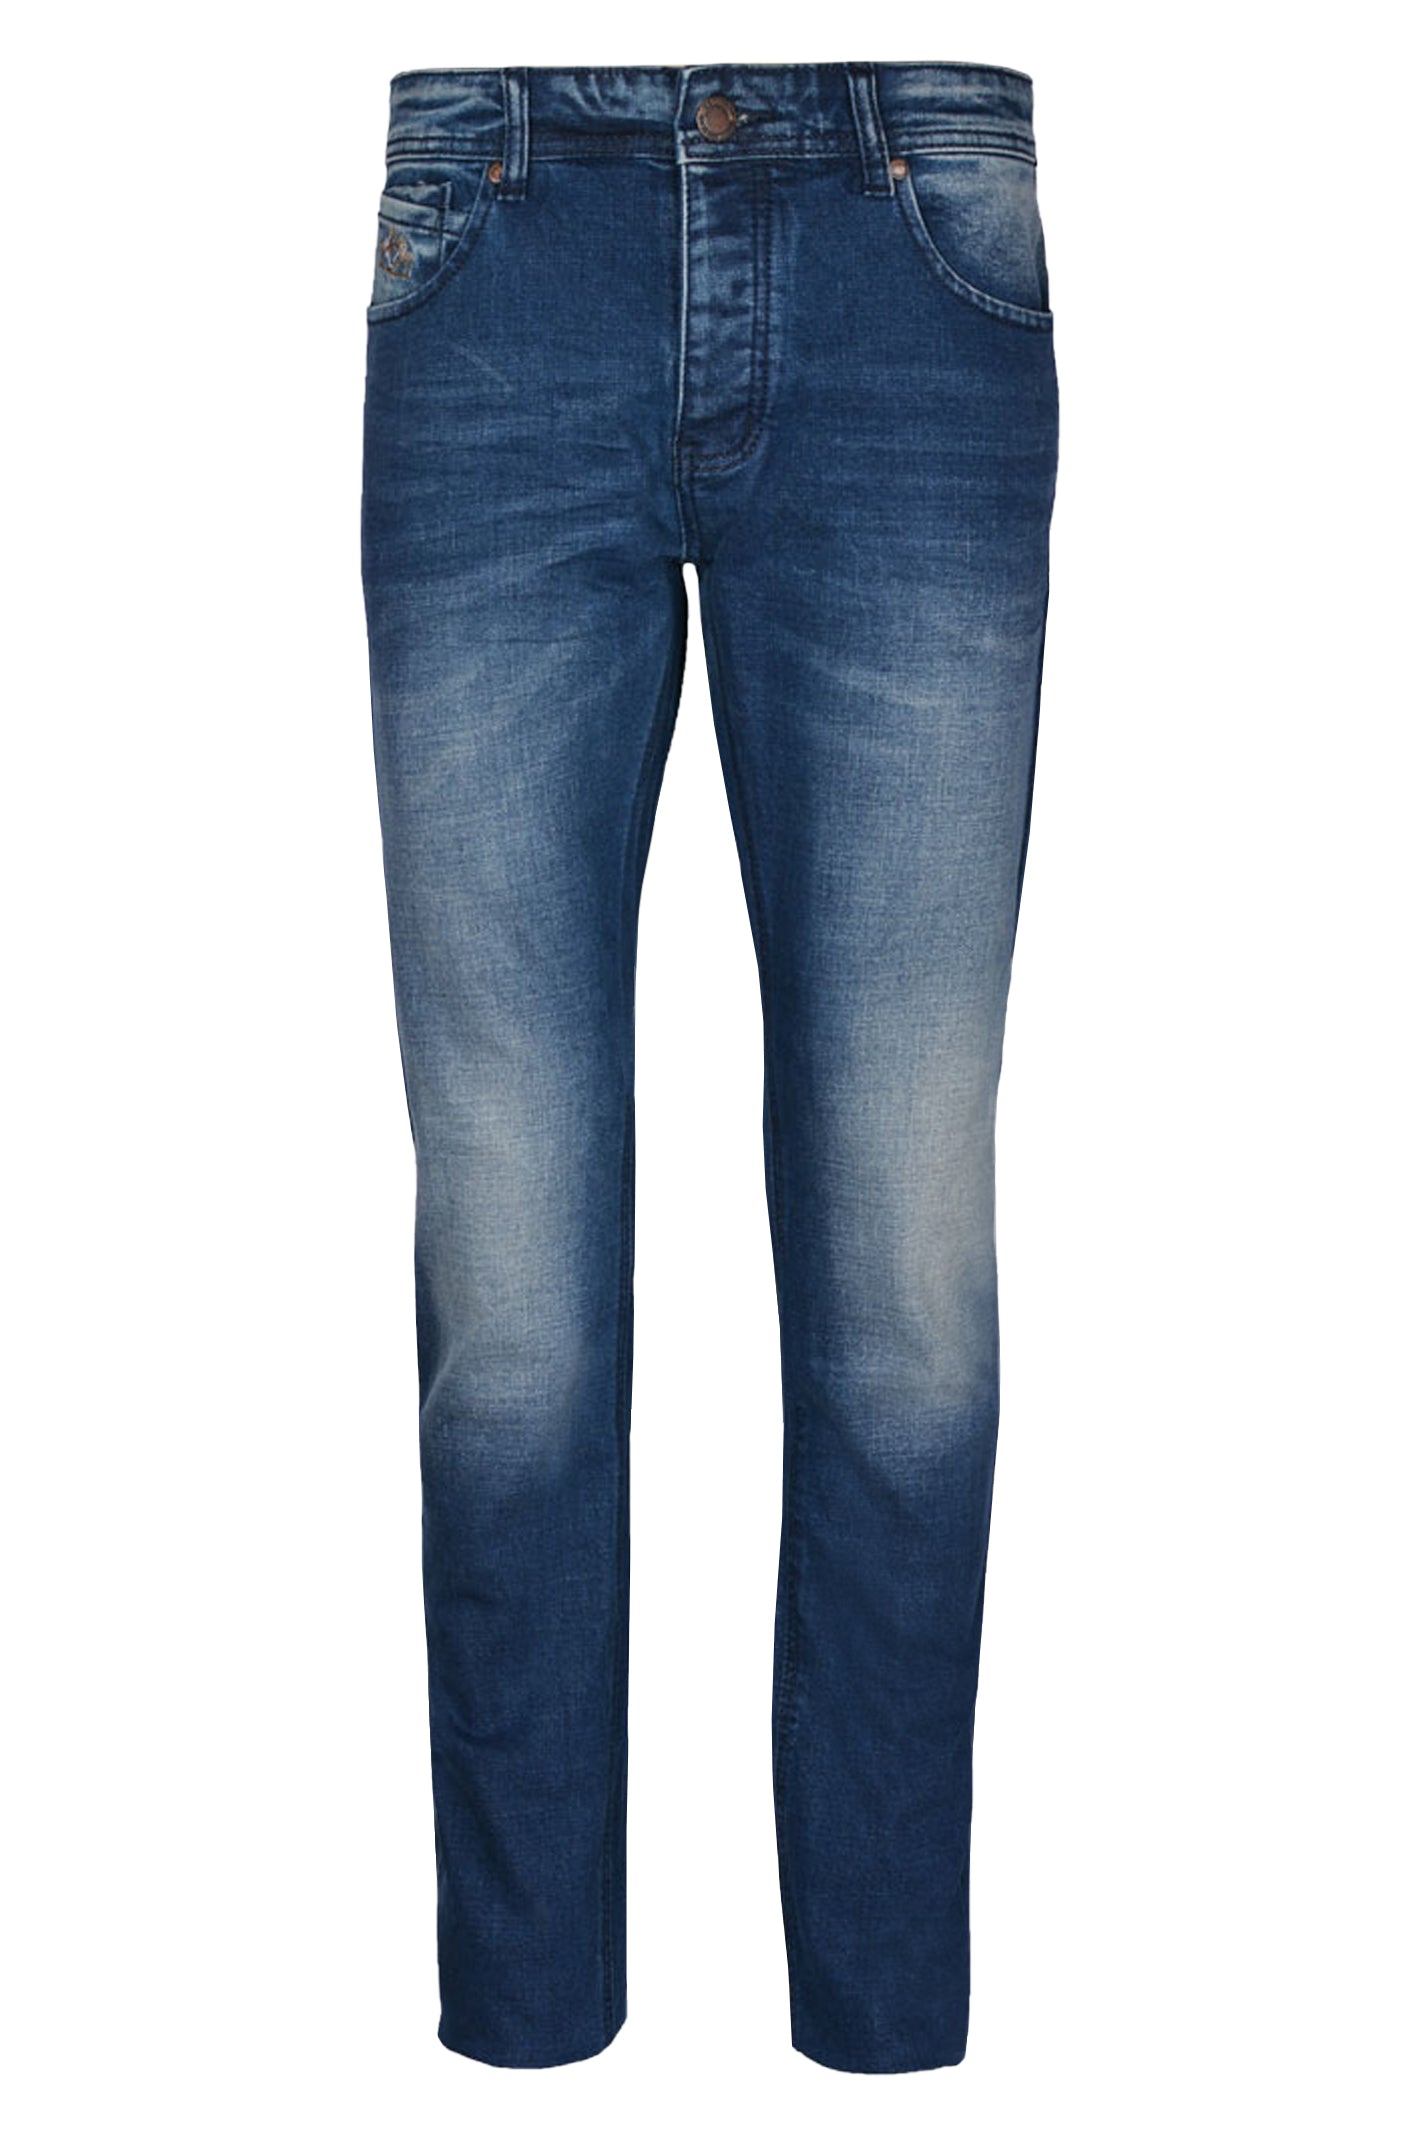 Casual Jeans in D-Blue SKU: BJ2714-D-BLUE - Diners